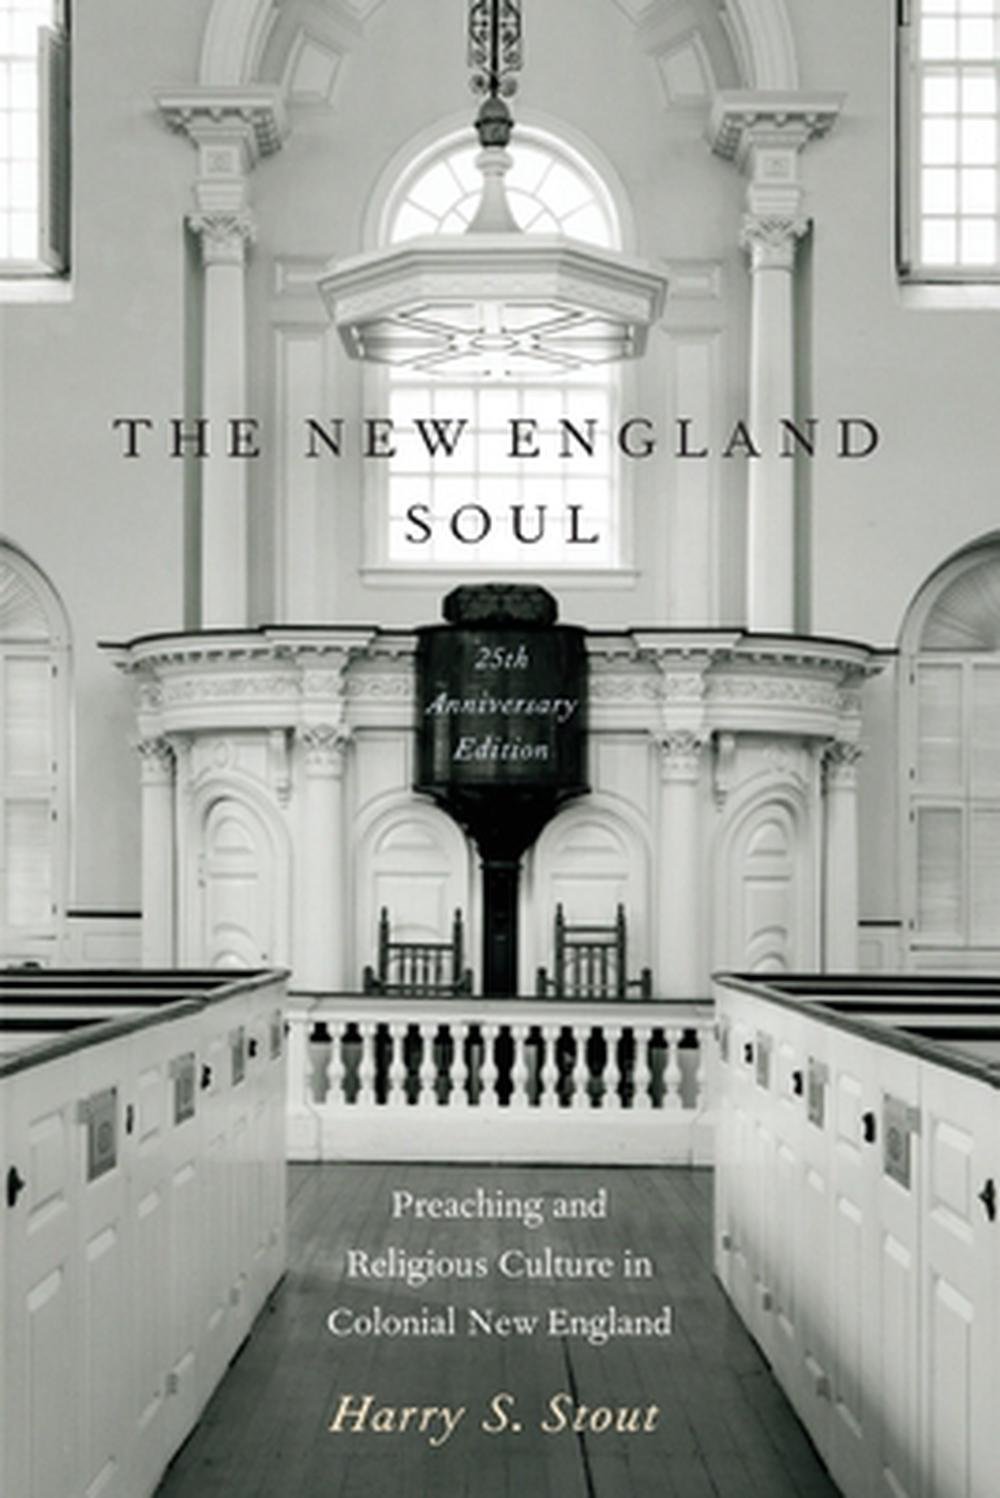 The New England Soul- Preaching and Religious Culture in Colonial New England.jpeg